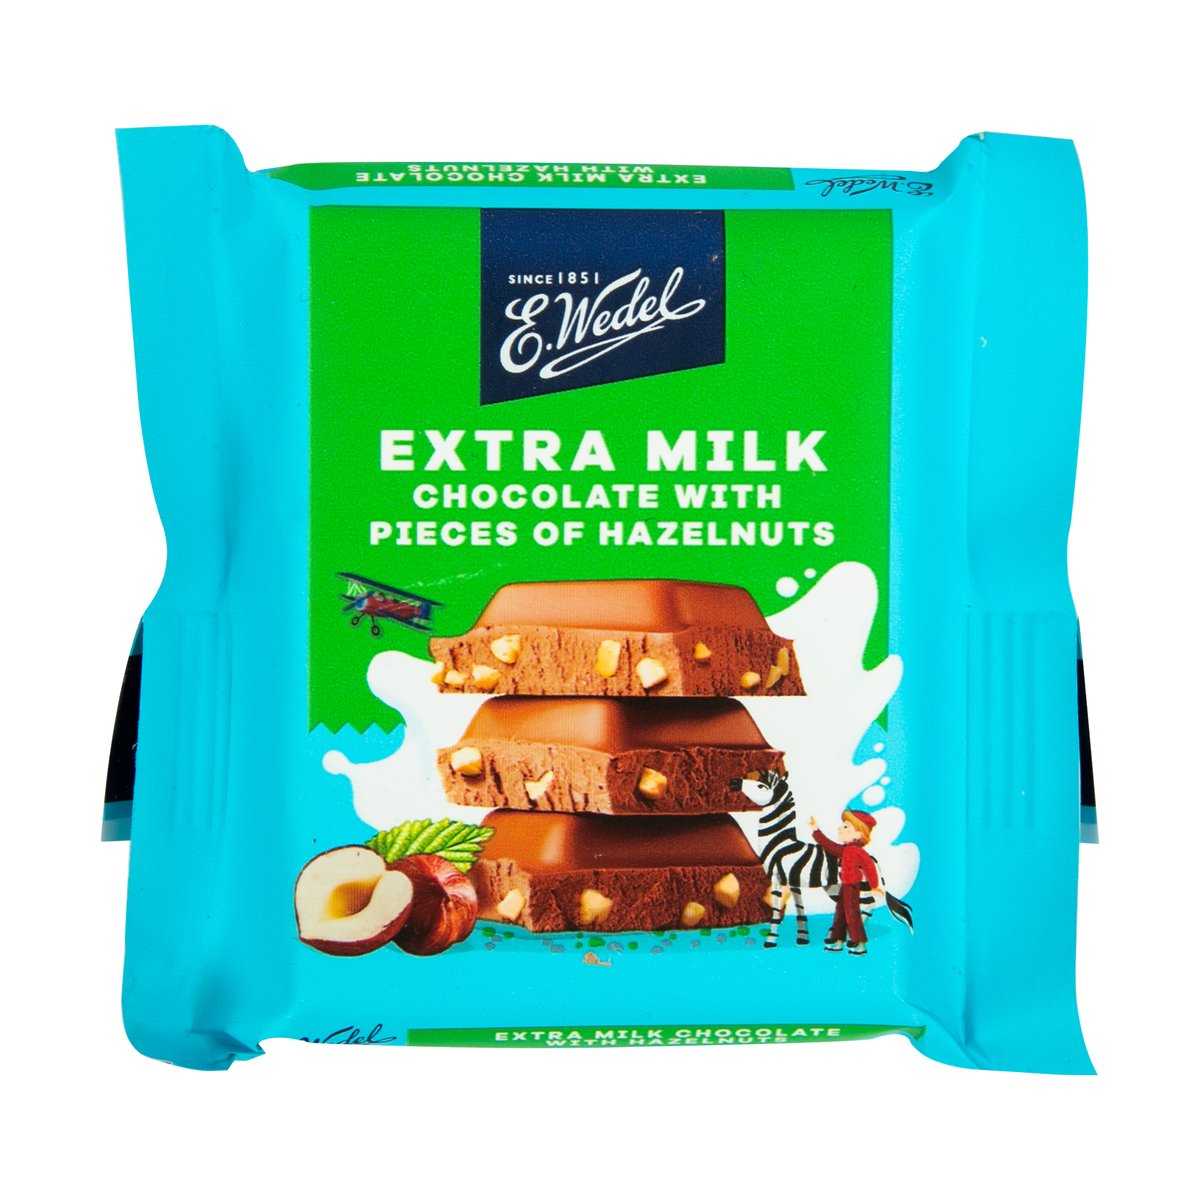 E.Wedel Extra Milk Chocolate with Pieces of Hazenuts 40 g